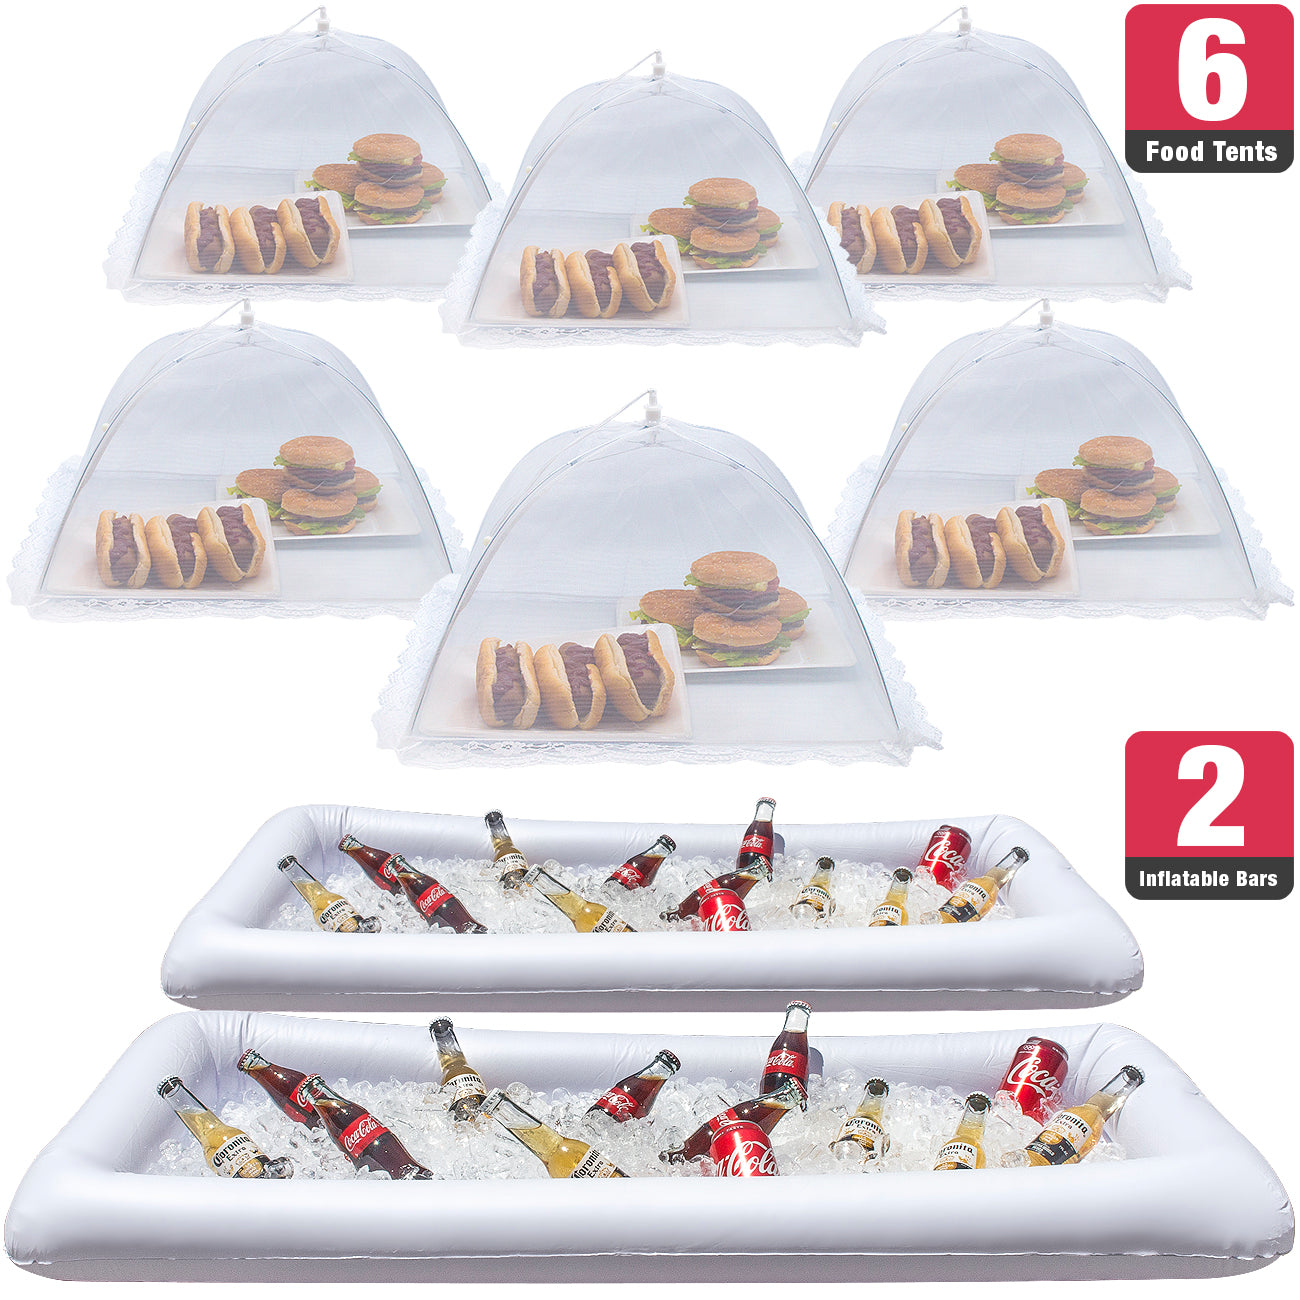 Inflatable Serving Bar and Food Cover Umbrellas (Bundle) - Sorbus Home